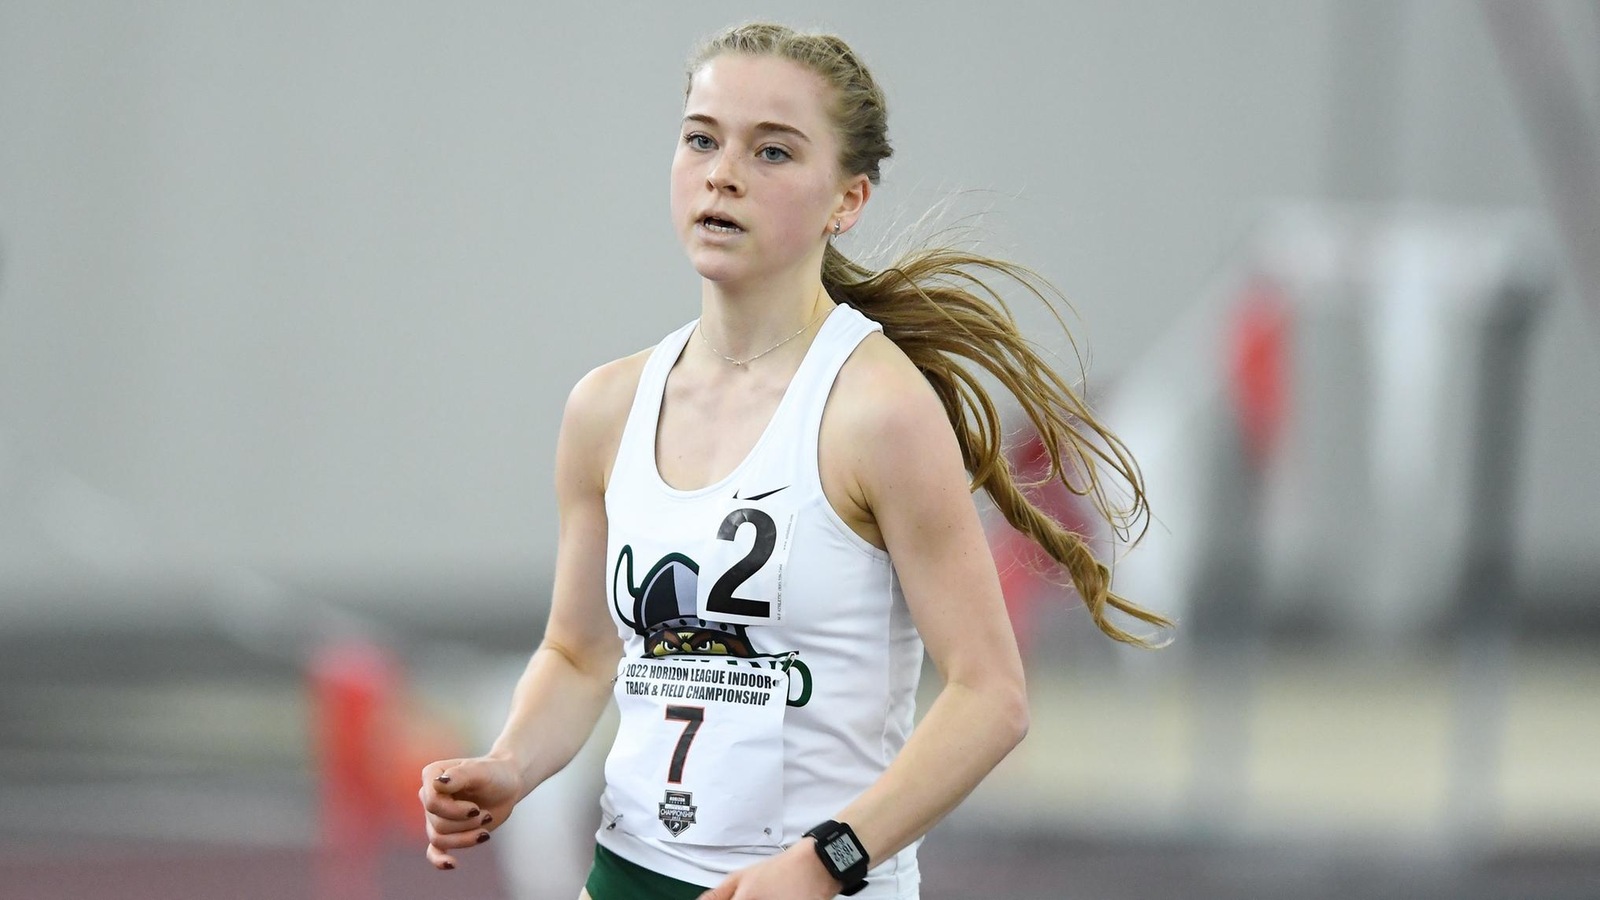 Cleveland State Track & Field Has Strong Showing At Spire Collegiate